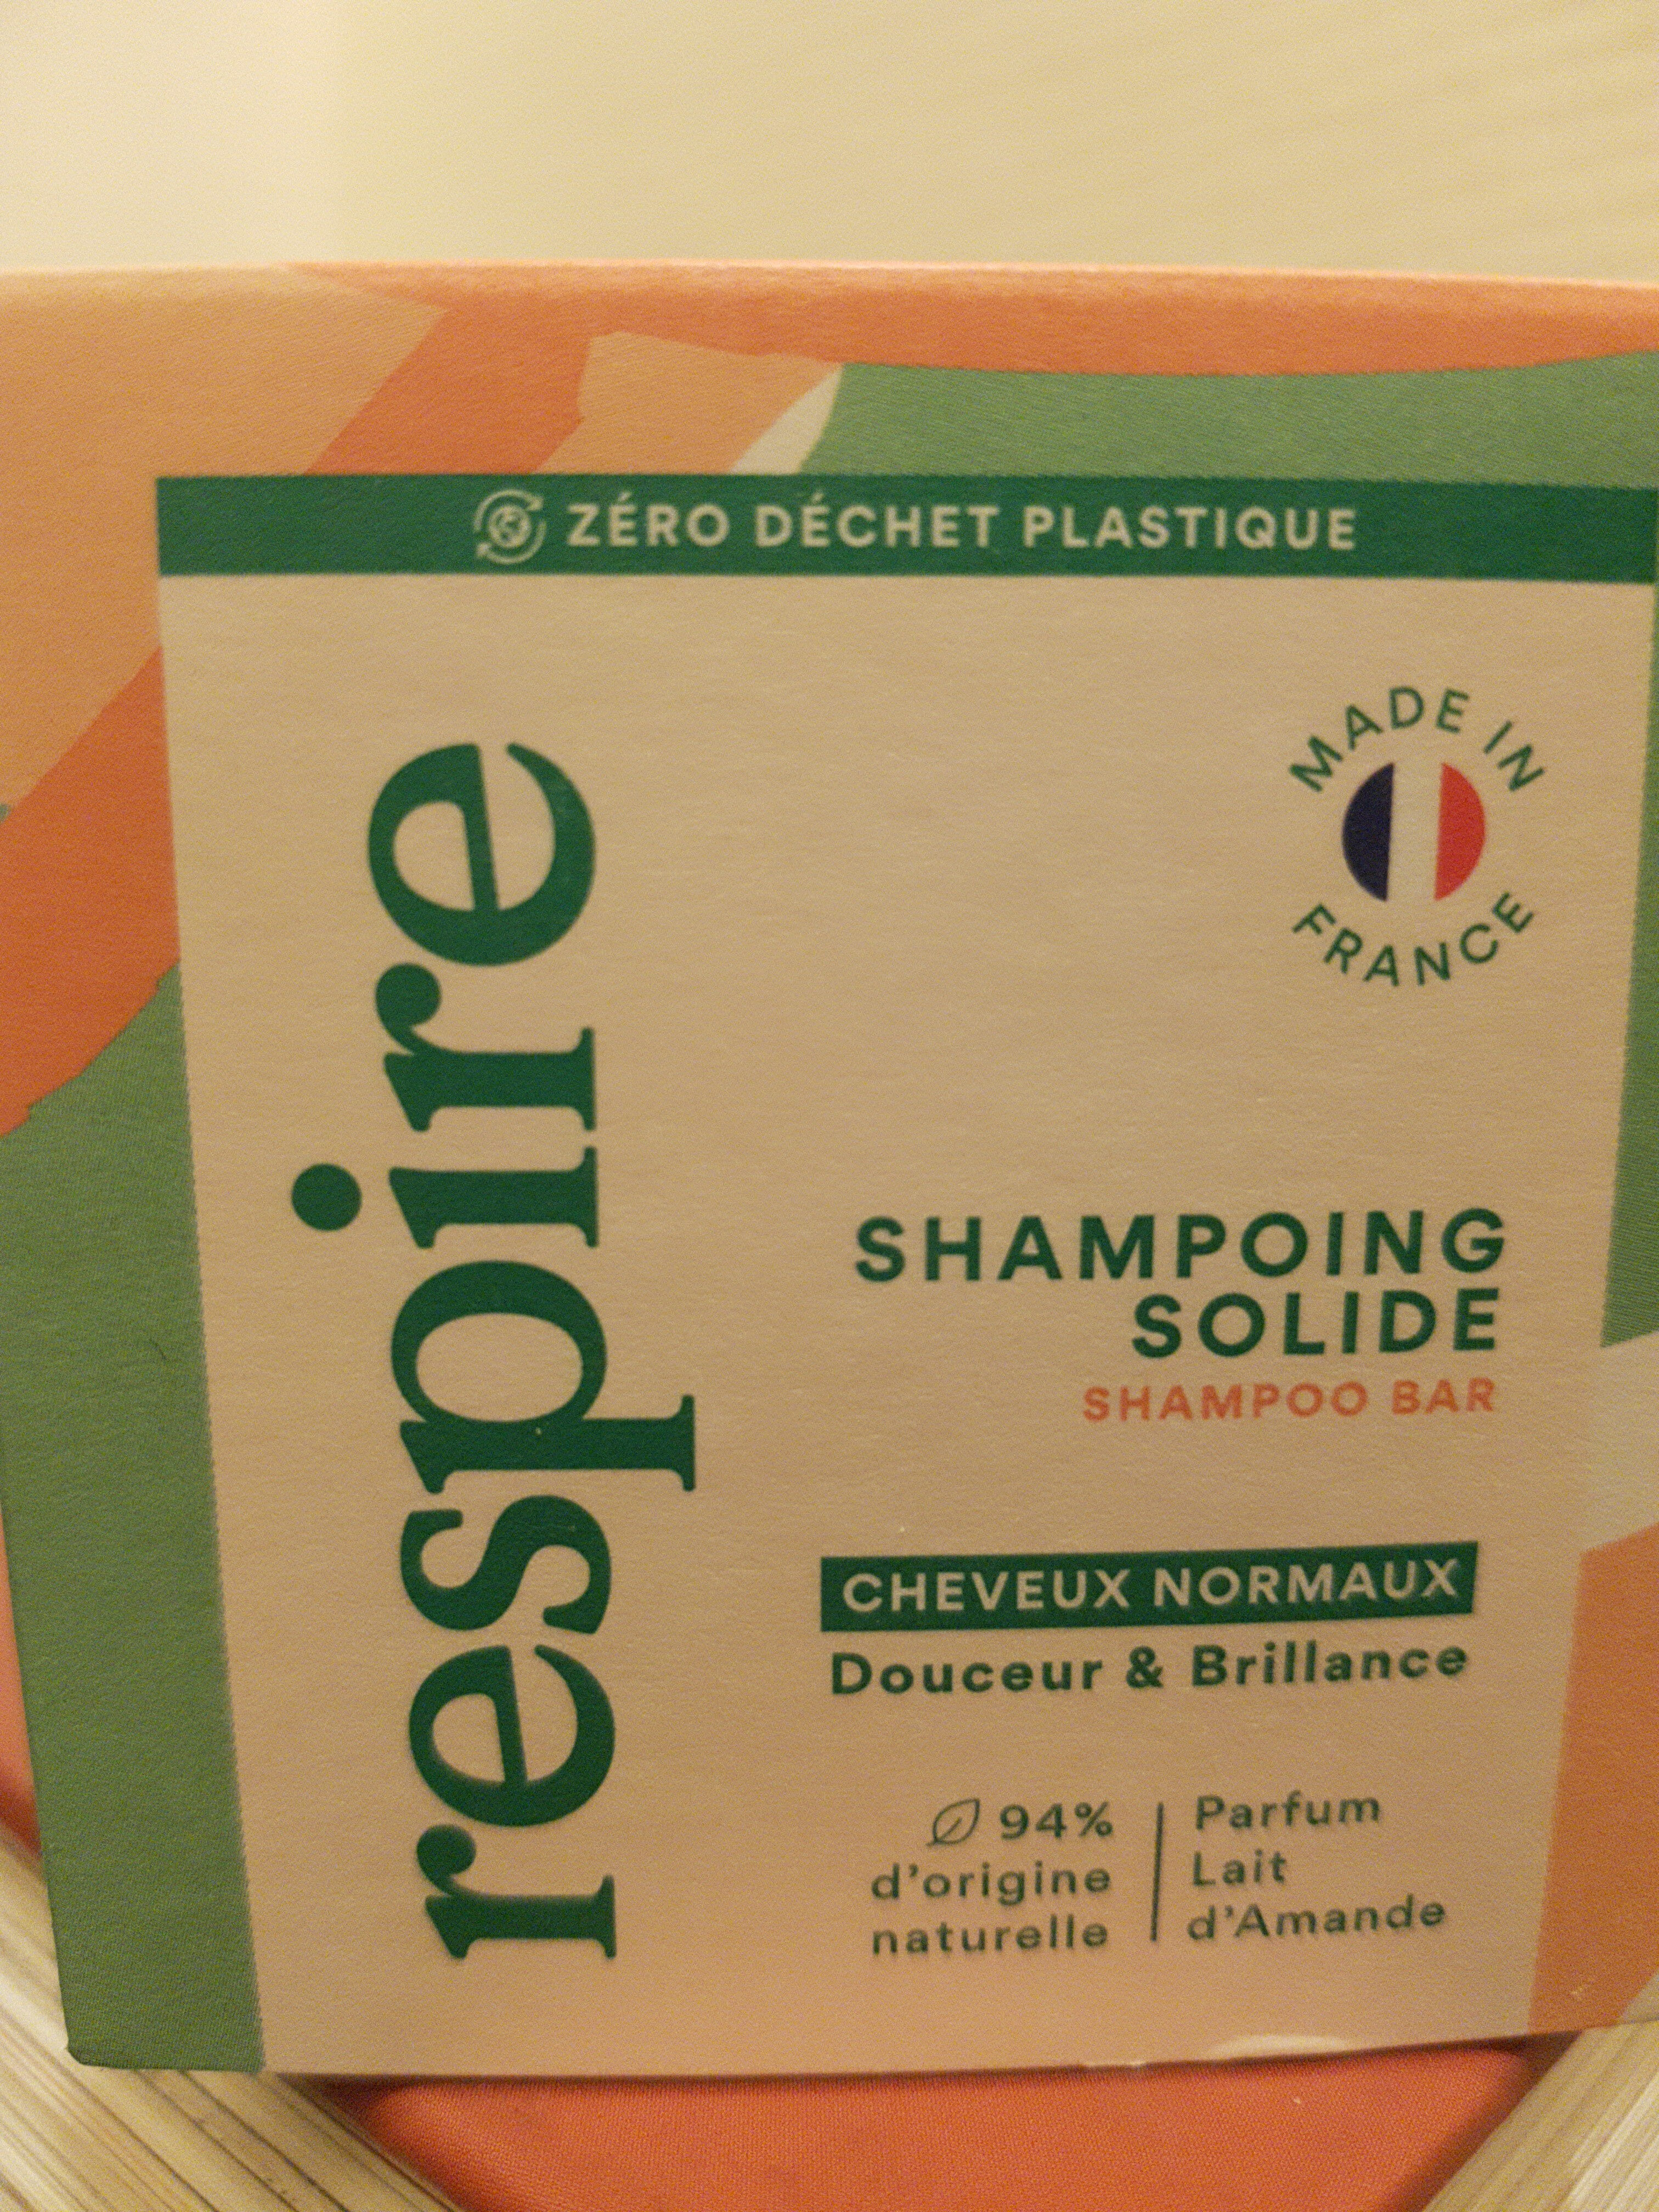 shampoing solide - Product - fr